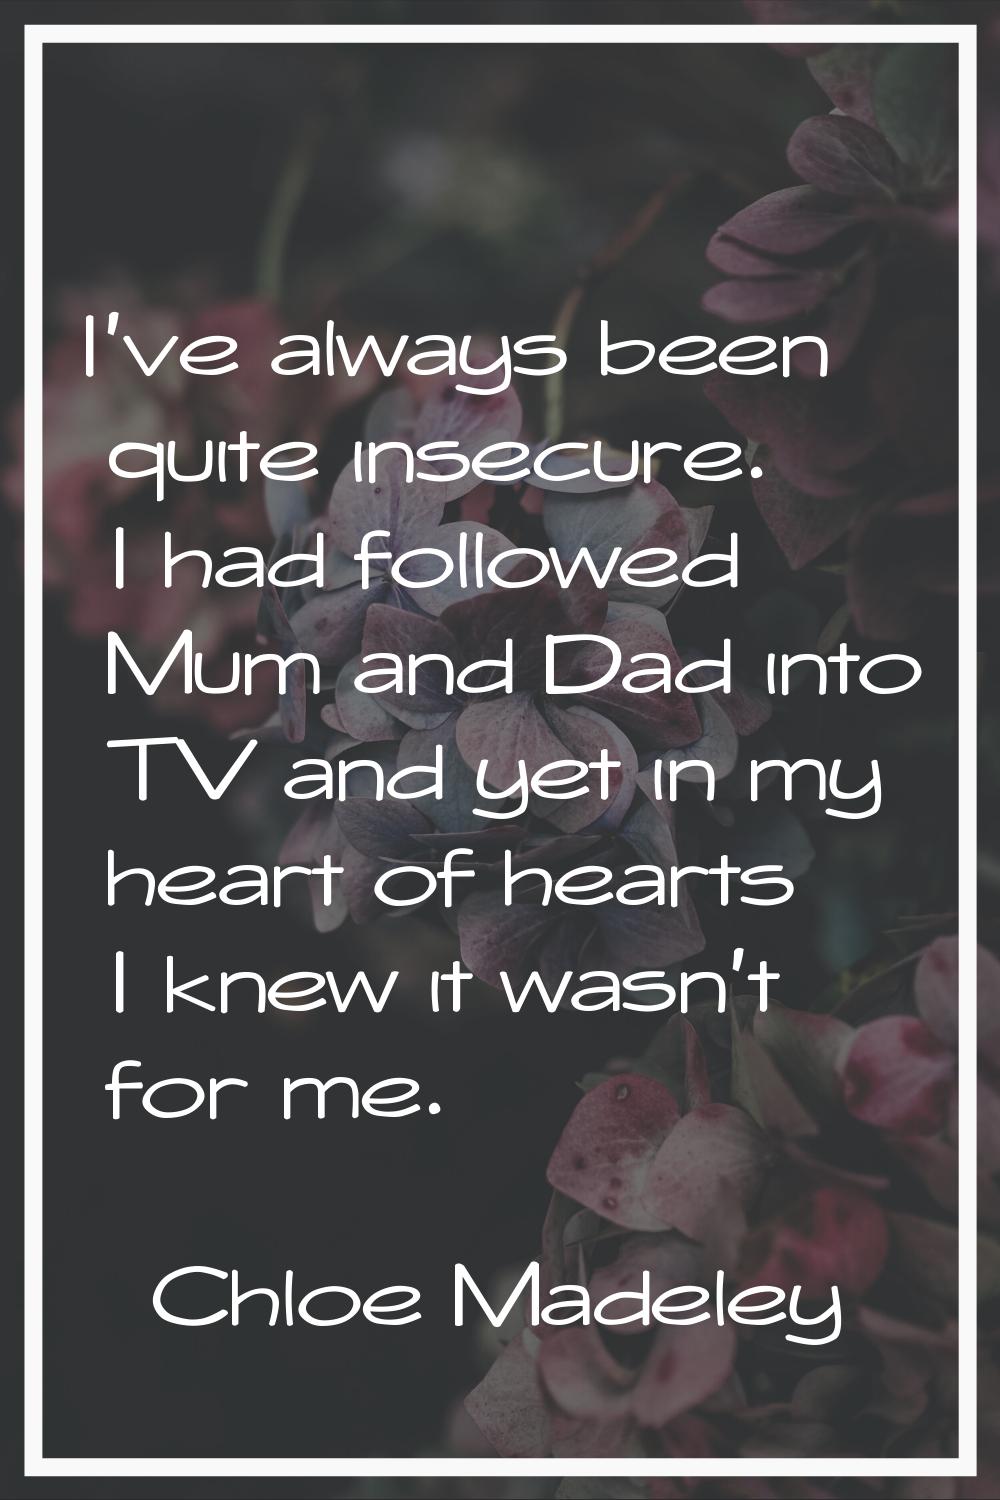 I've always been quite insecure. I had followed Mum and Dad into TV and yet in my heart of hearts I